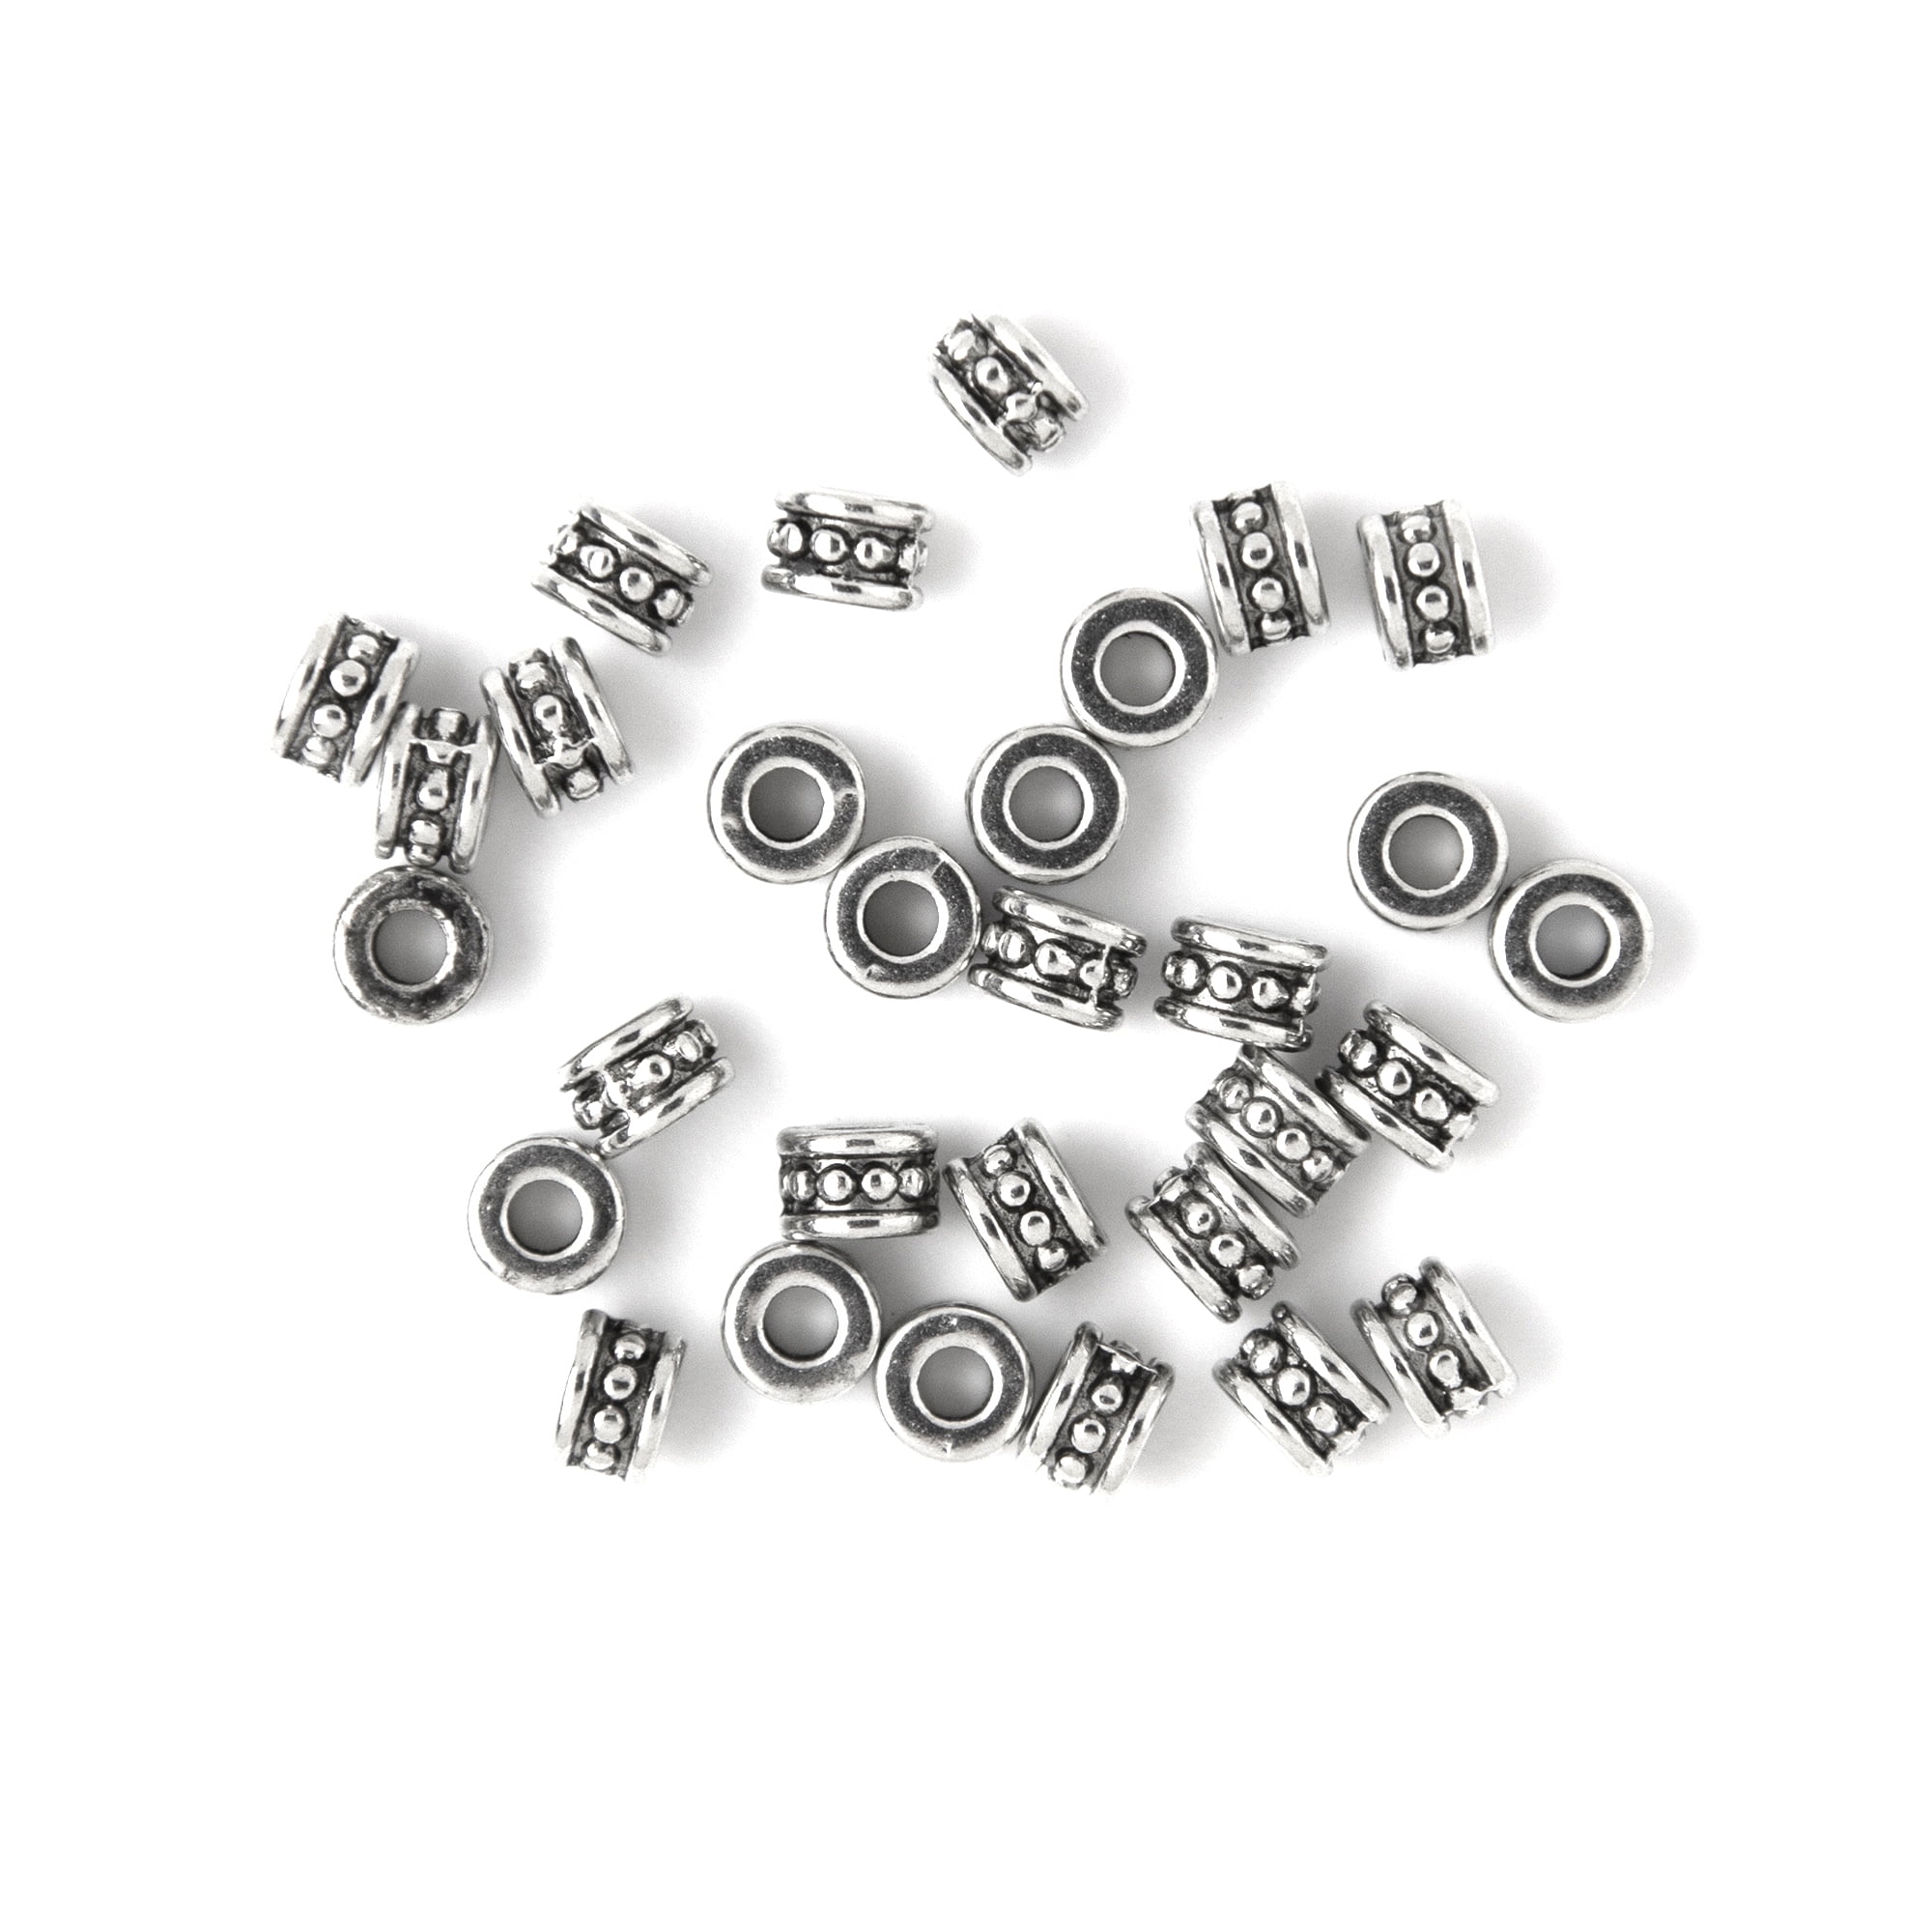 100pcs 6mm (0.24 inch) Silver Pumpkin Corrugated Loose Round Metal Spacer Beads for Jewelry Craft Making CF92-6